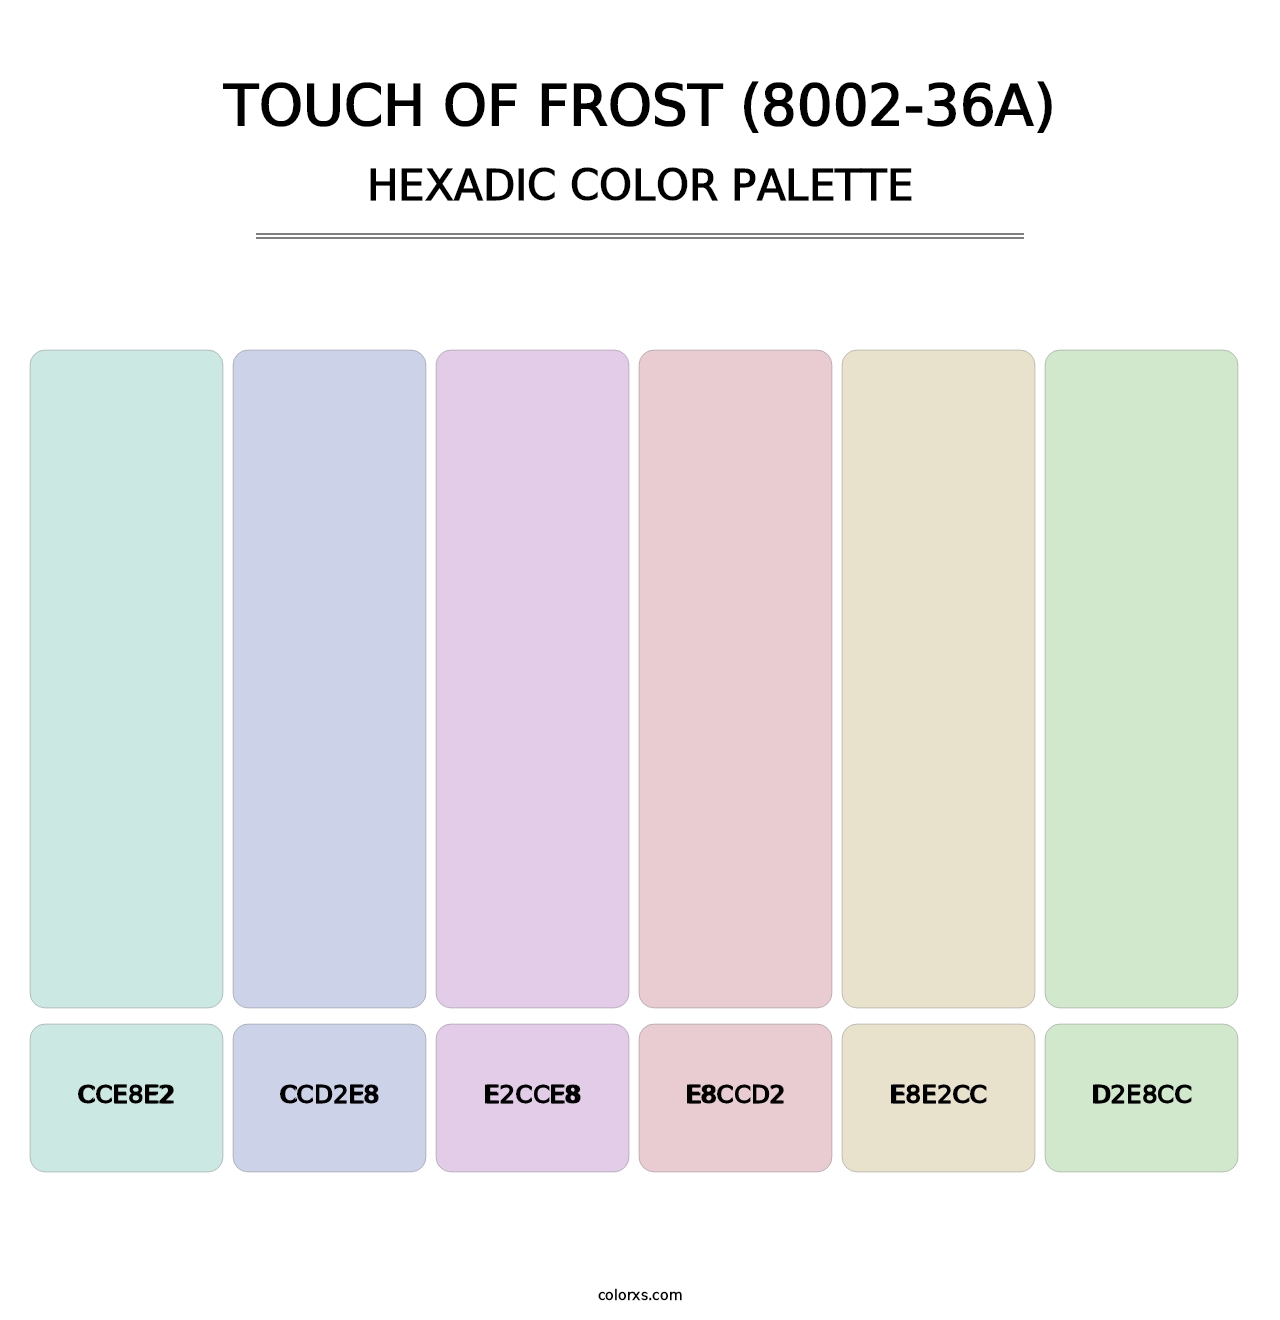 Touch of Frost (8002-36A) - Hexadic Color Palette